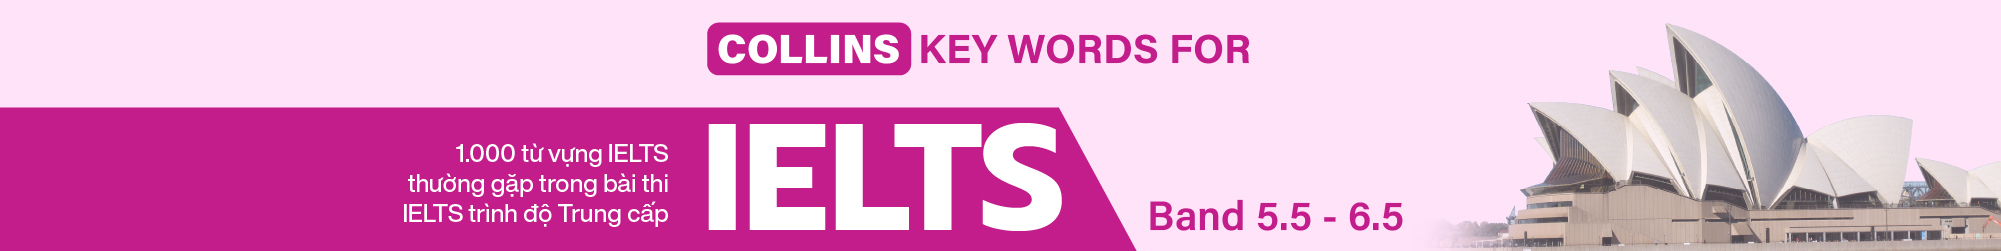 COLLINS KEY WORDS FOR IELTS (BAND 5.5 - 6.5)